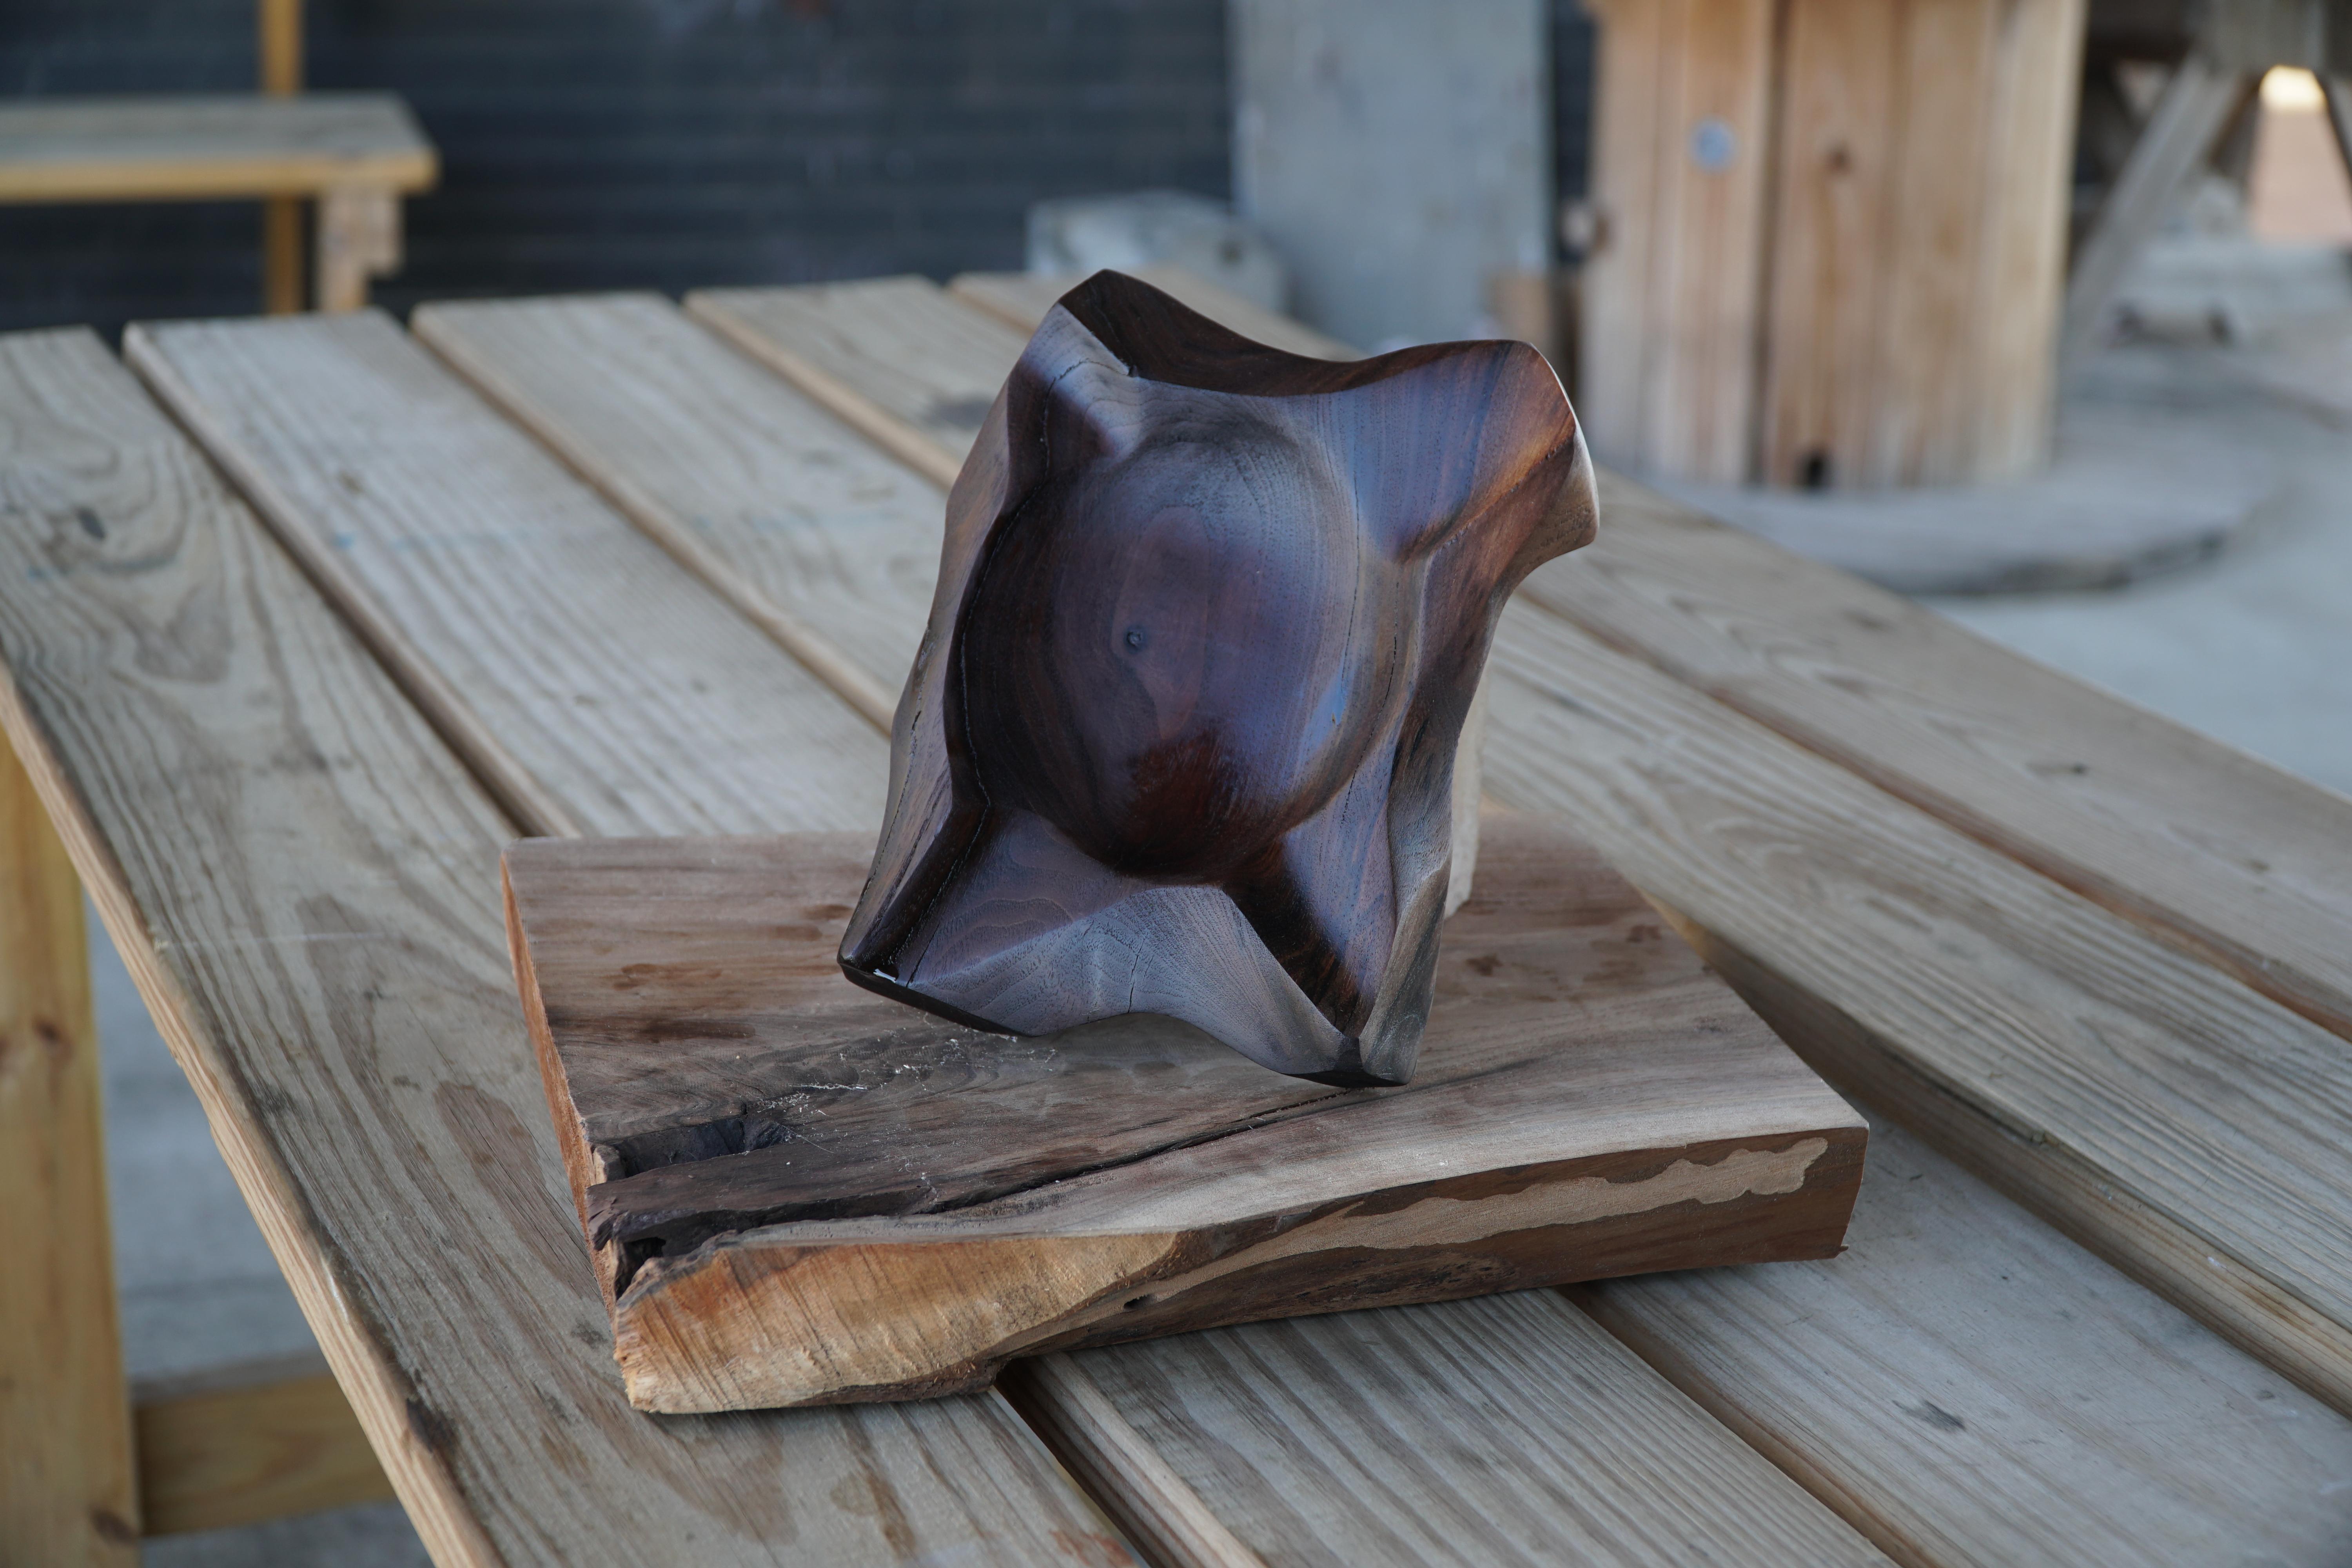 Each piece of black walnut is shaped individually and by hand to create a one-of-a-kind piece suitable for any setting. These unique pieces work great as gifts and are great additions to the collection of any tobacco or smoking connoisseur. Also